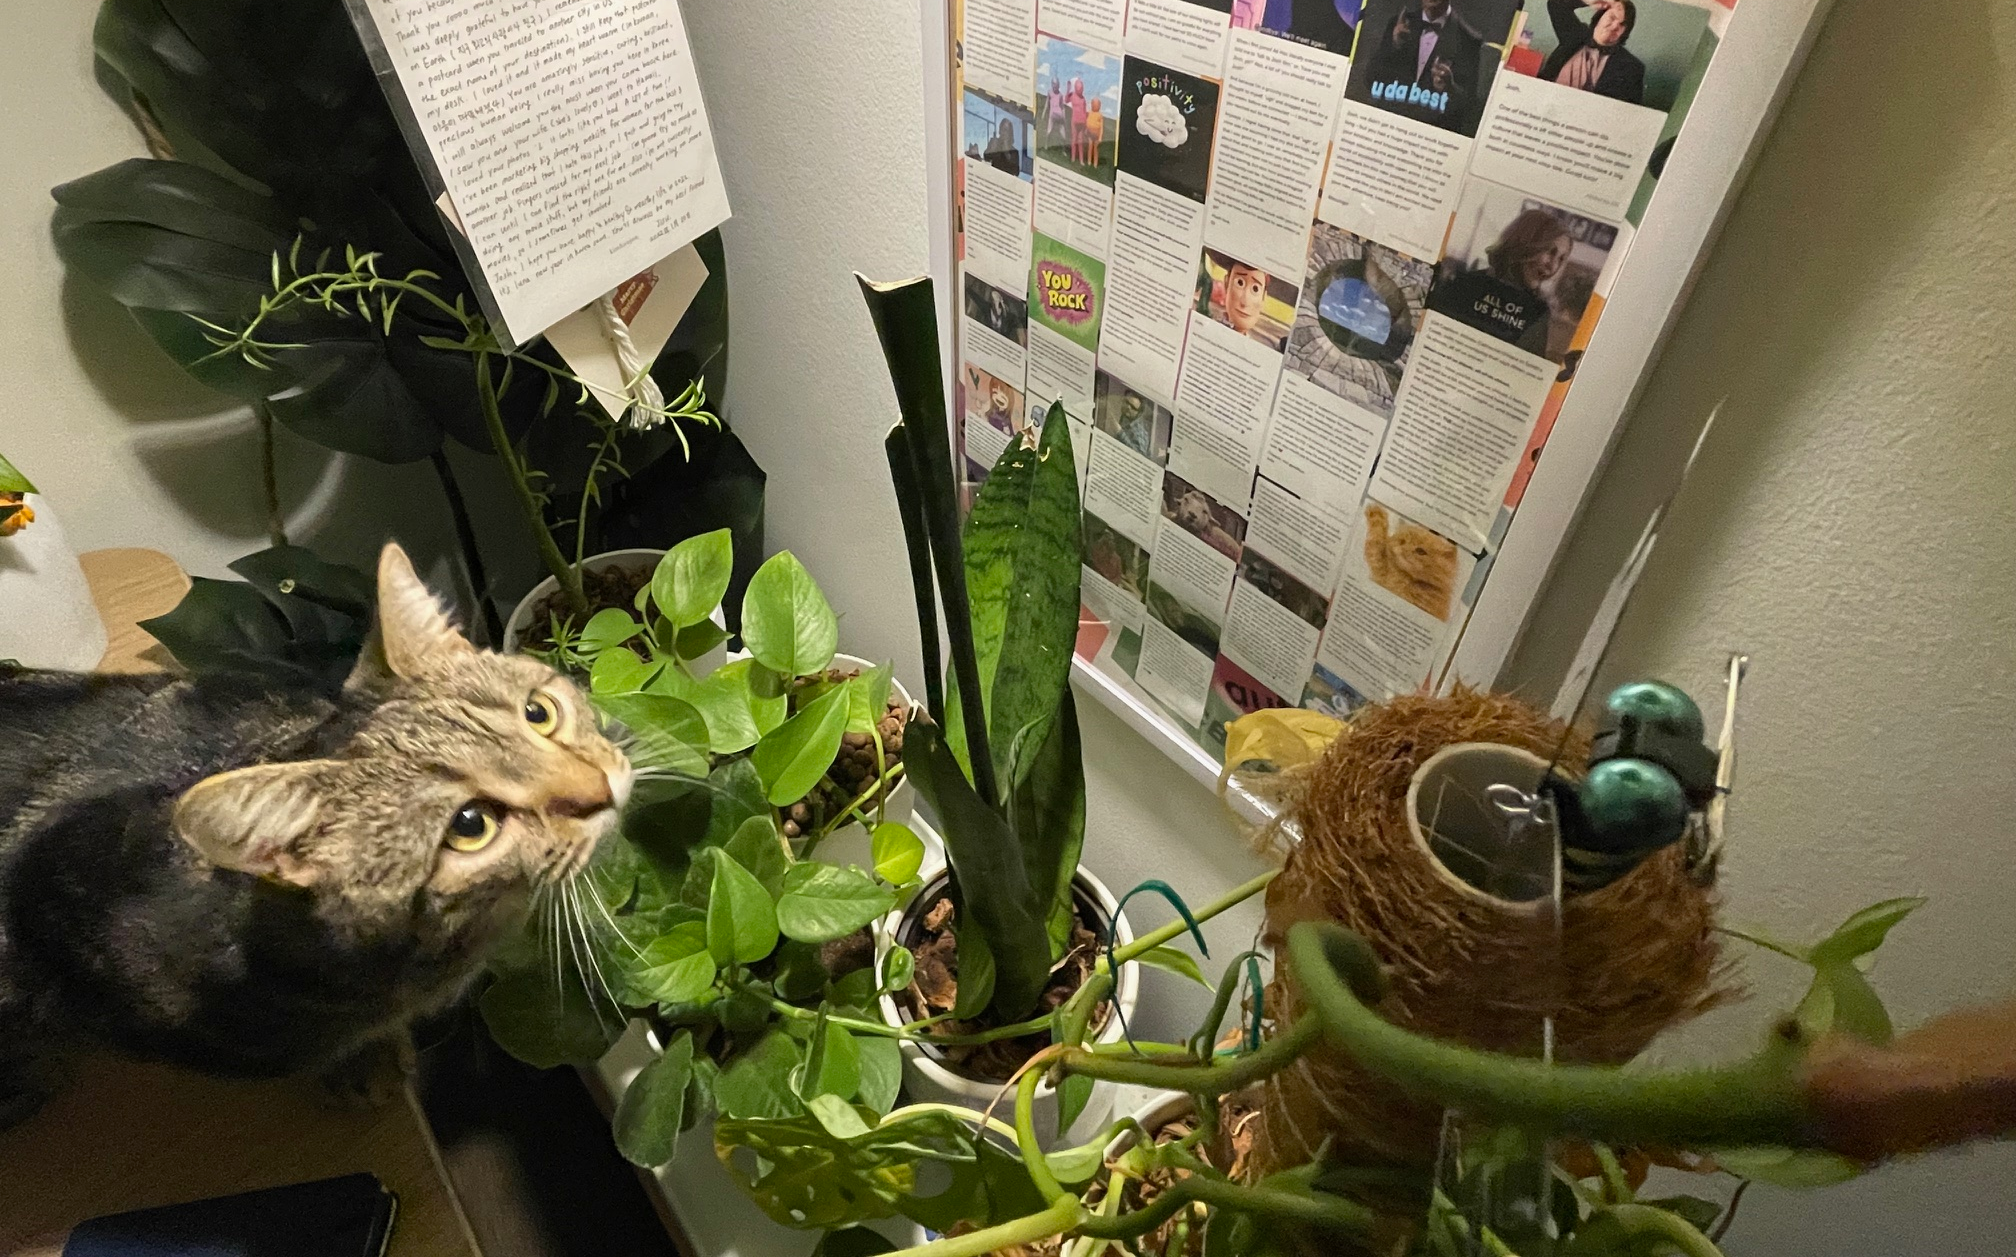 A brown tabby cat on a desk full of house plants. A poster is in the background with a collage of memes and thanks for my work at VA.